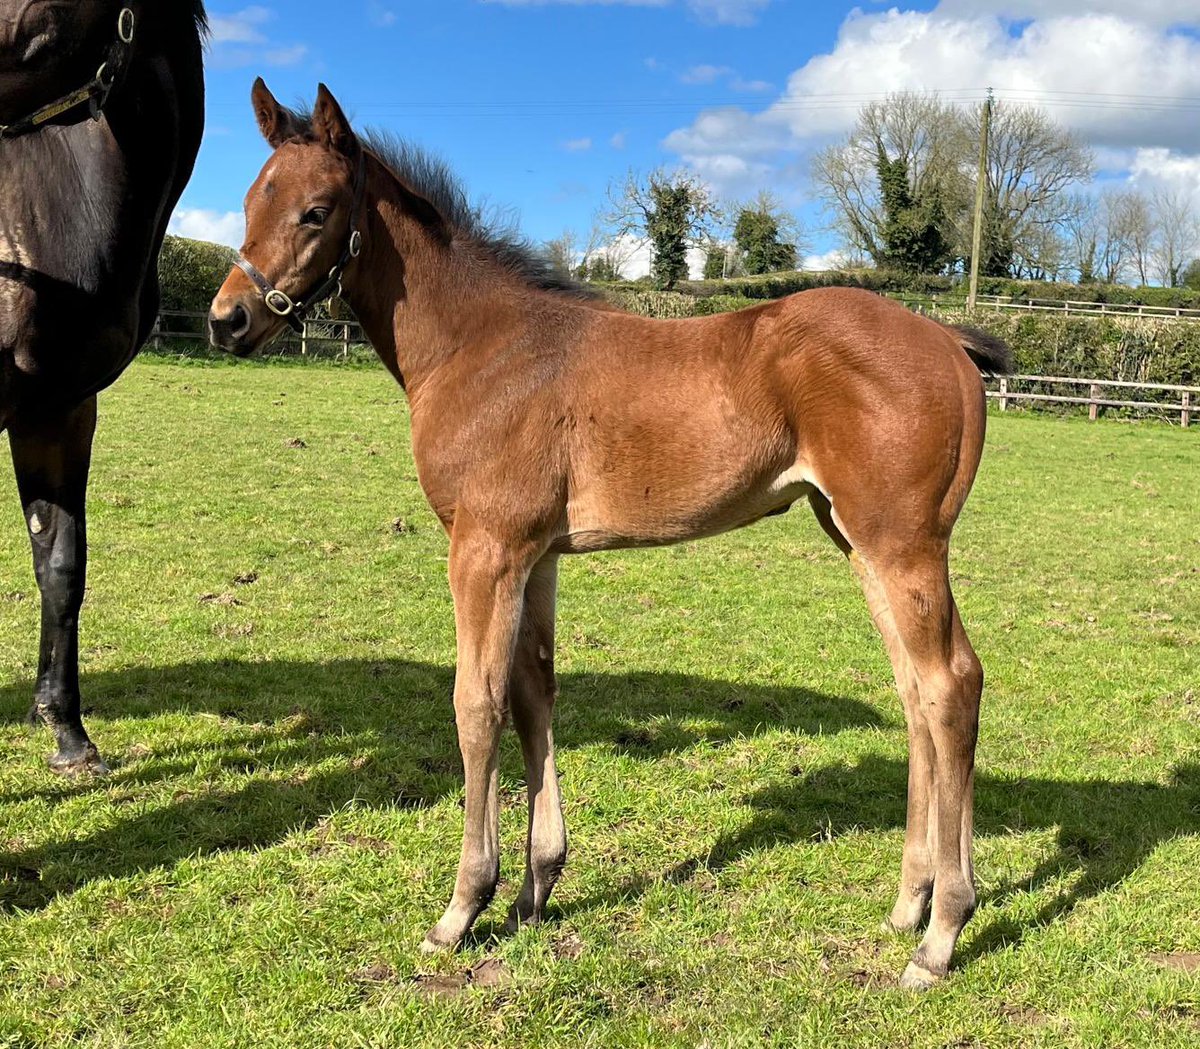 We’re absolutely delighted with this strong daughter of @Lanwades SEA THE MOON. A first foal out of €410,000 @Goffs1866 purchase SUWAYRA (SIYOUNI). Suwayra hails from the wonderful @AgaKhanStuds family of champion SINNDAR was recently covered by SEA THE STARS. ⭐️